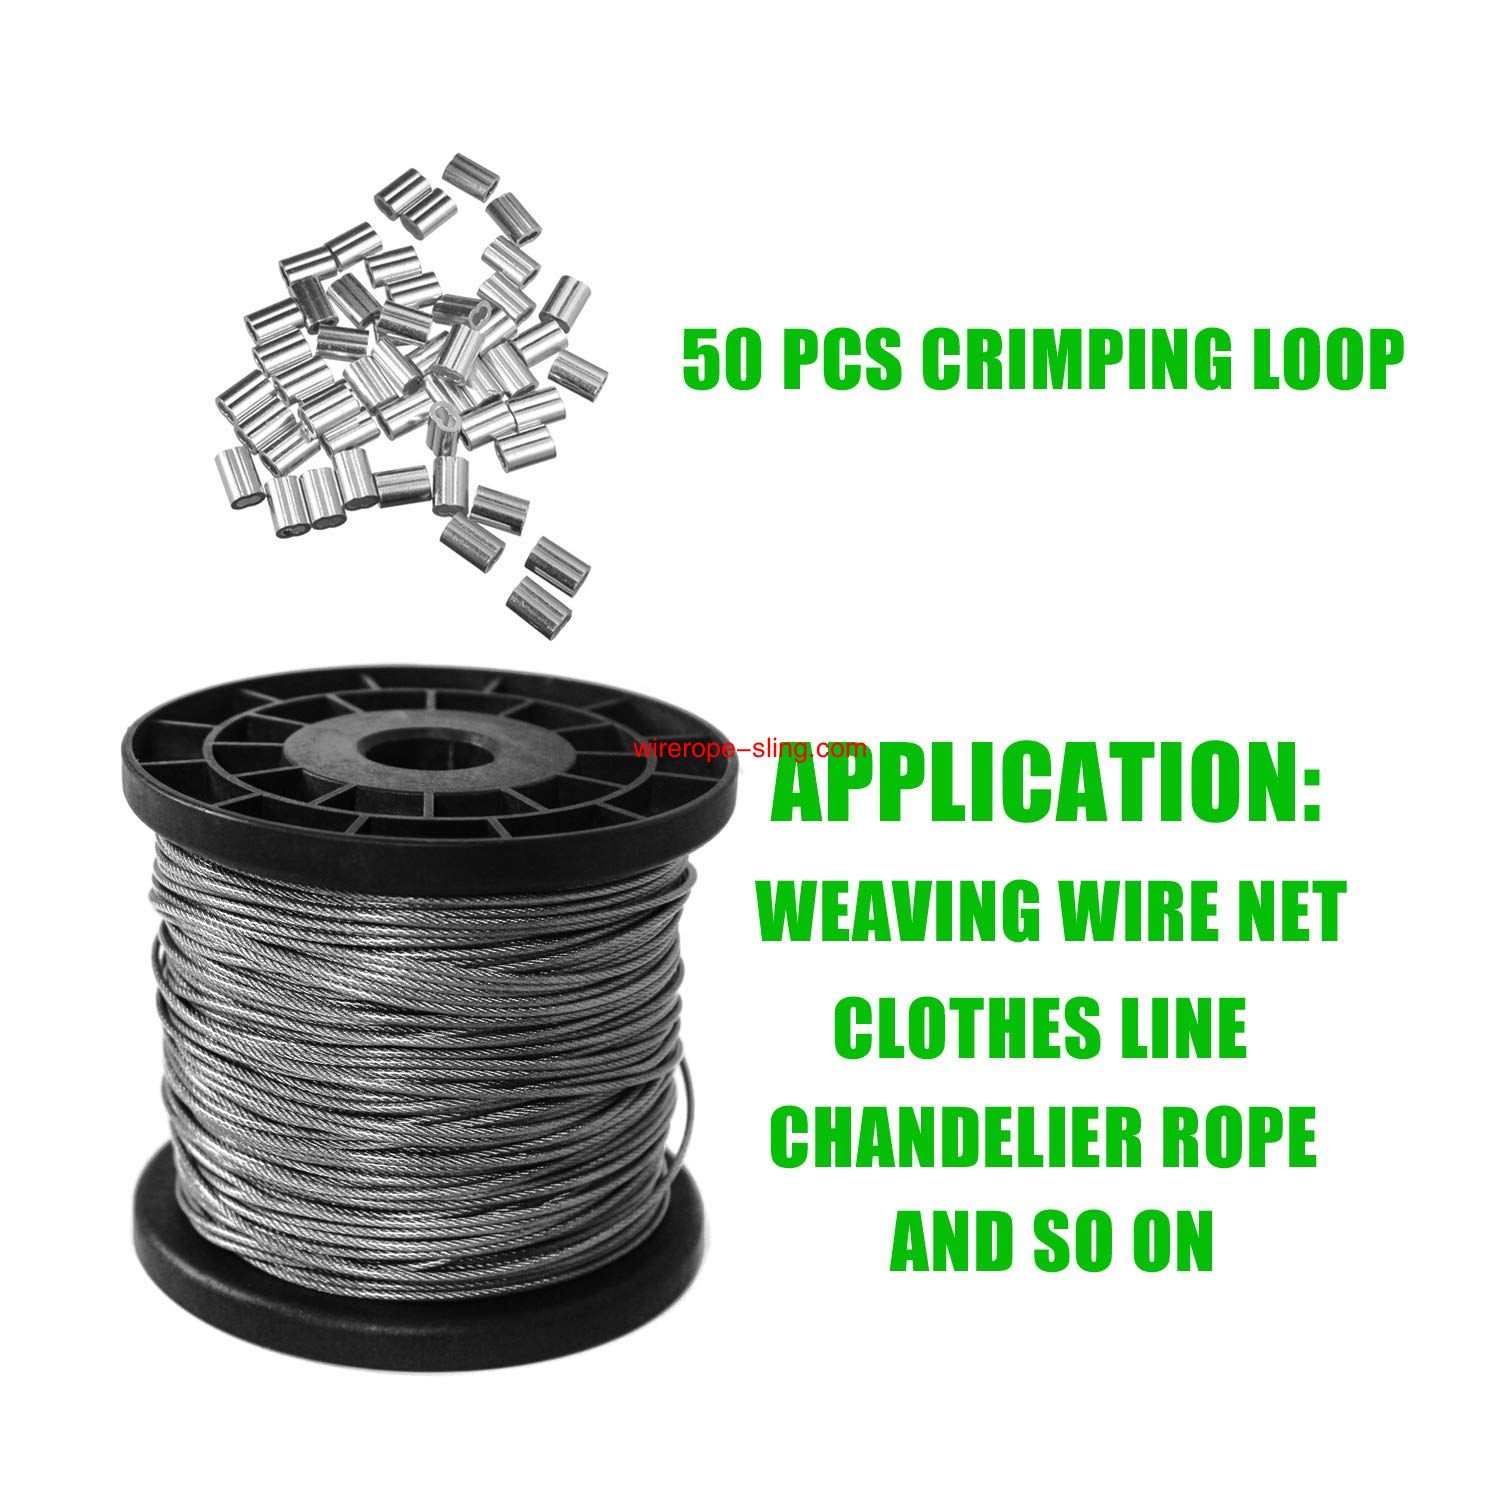 1/16 Inch Vinyl Coated Wire Rope Kit,330 Feet Stainless Steel 304 Wire Rope com 50 PCS Aluminum Crimping Loop e 10 PCS Clamps